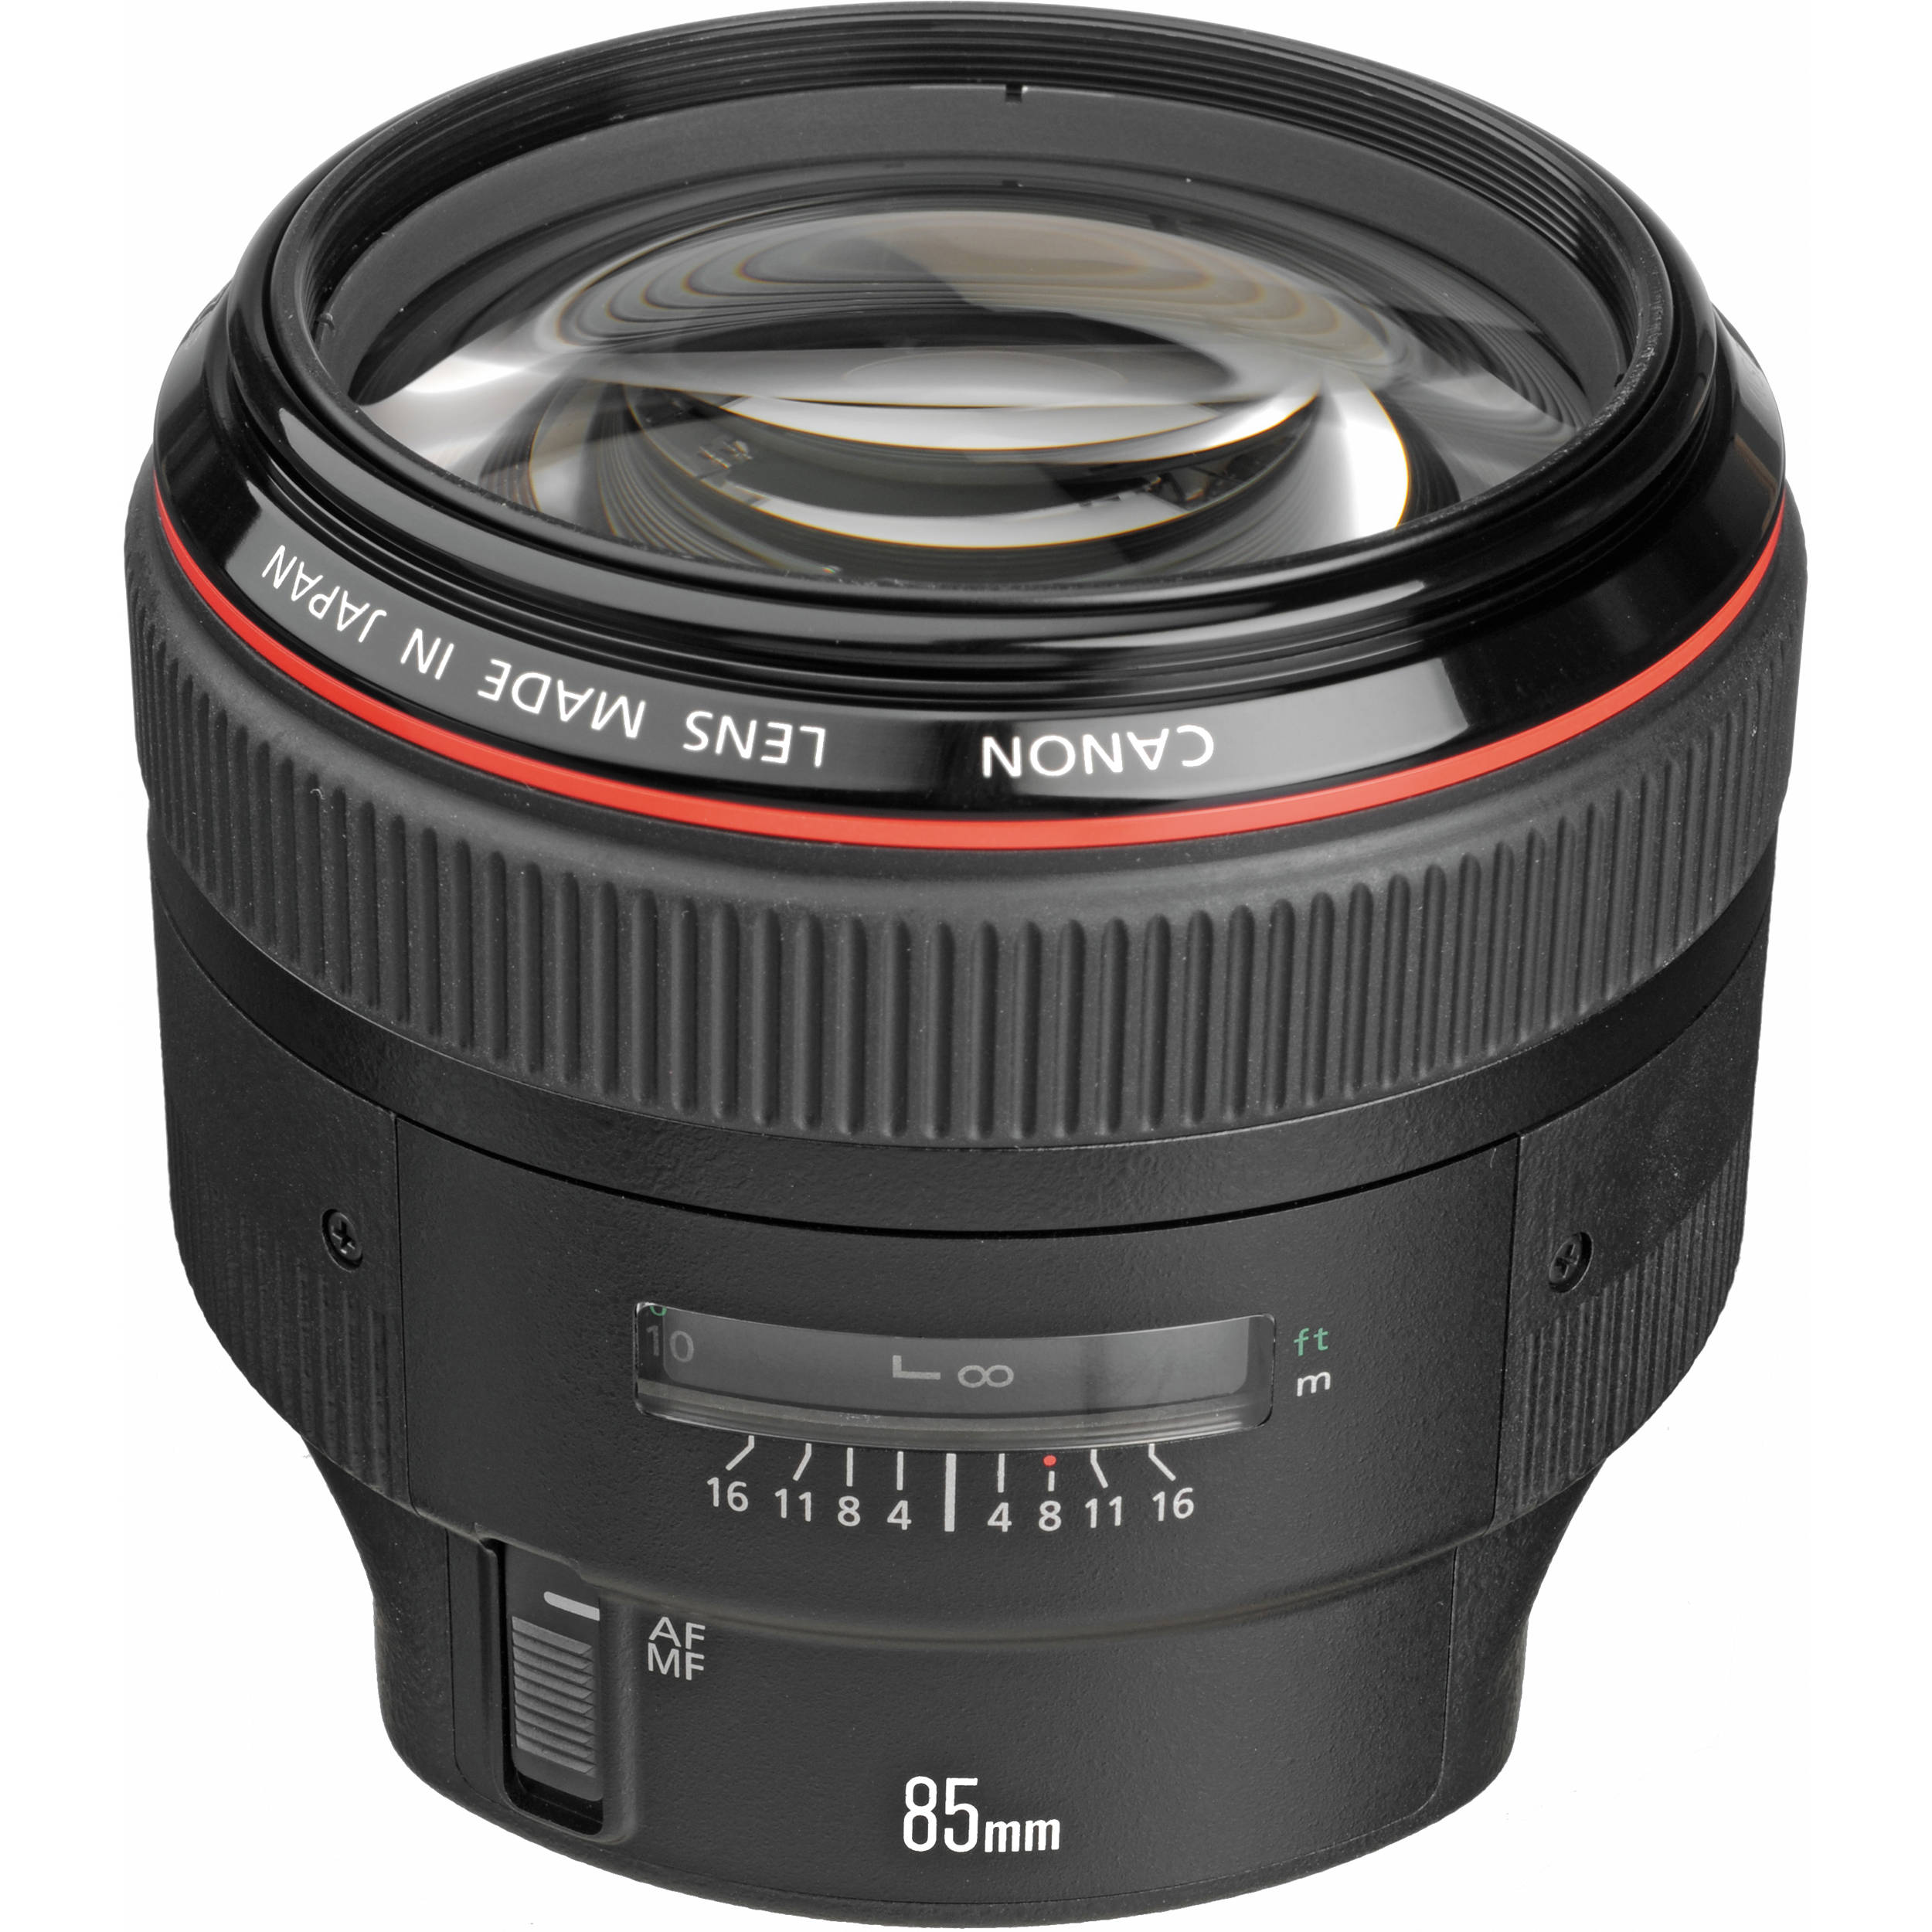 CANON EF 85mm f/1.2 L IS USM